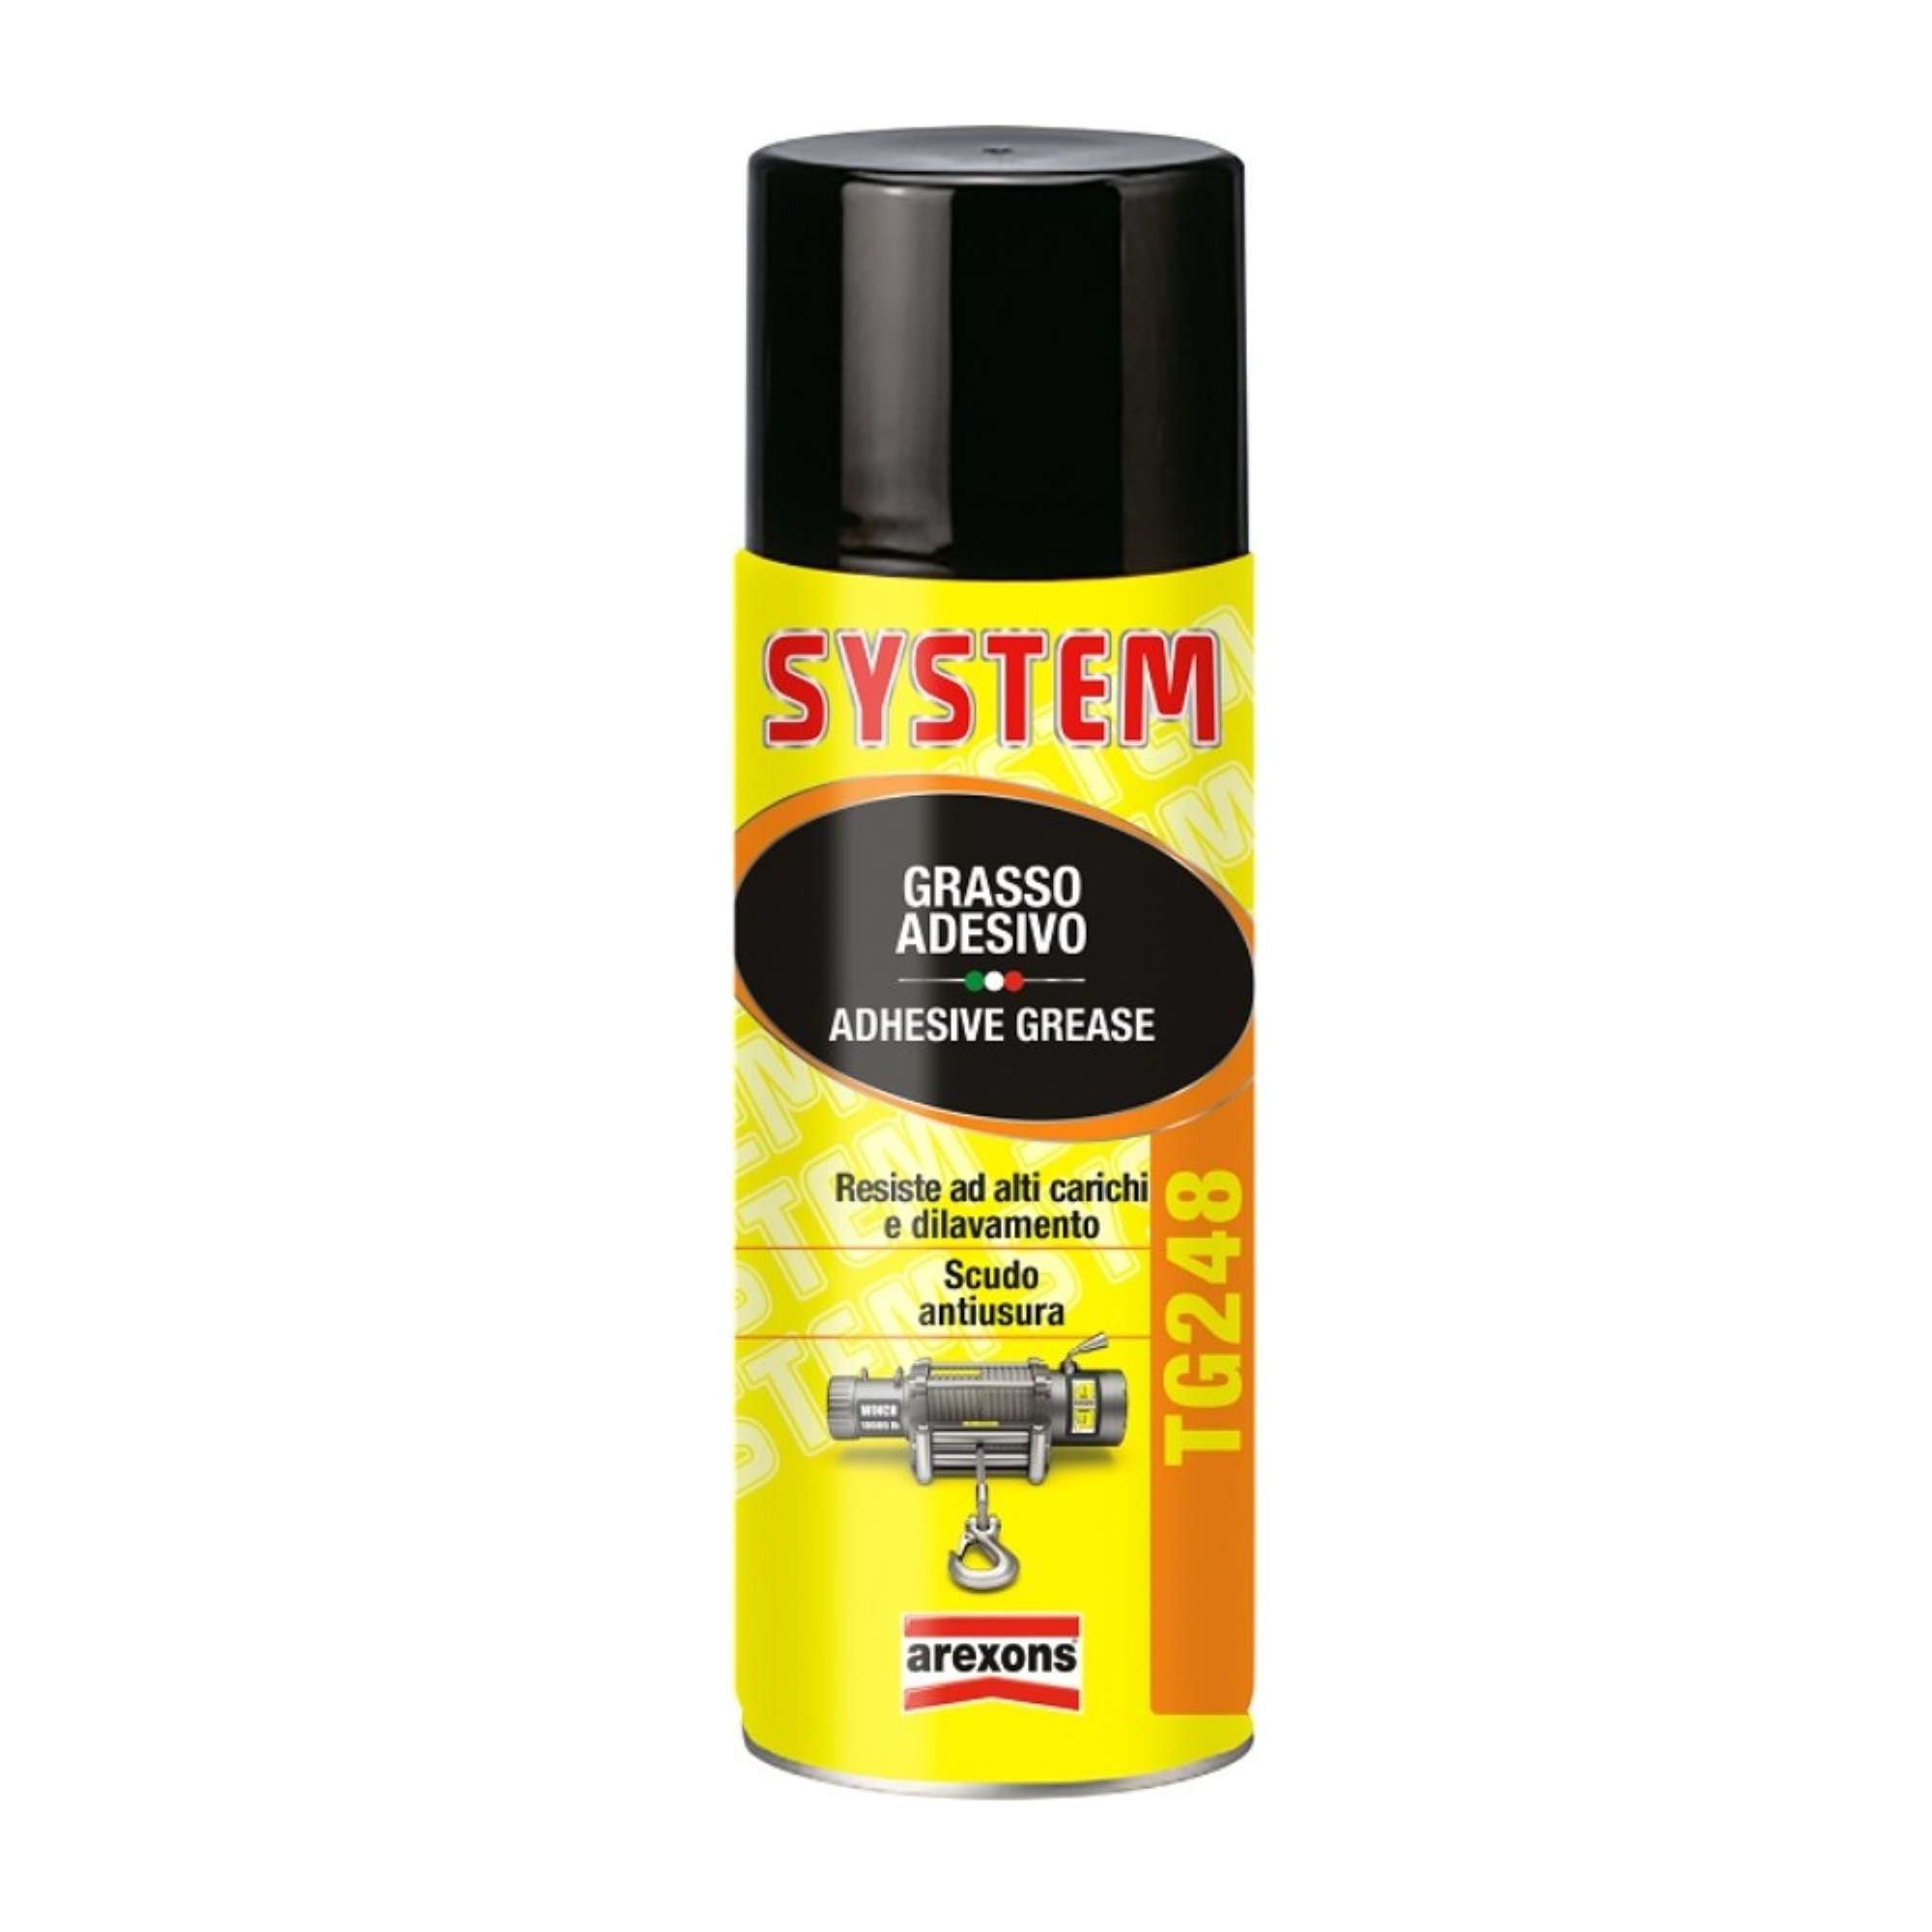 System TG248 Grasso adesivo 400ml - Arexons 4248